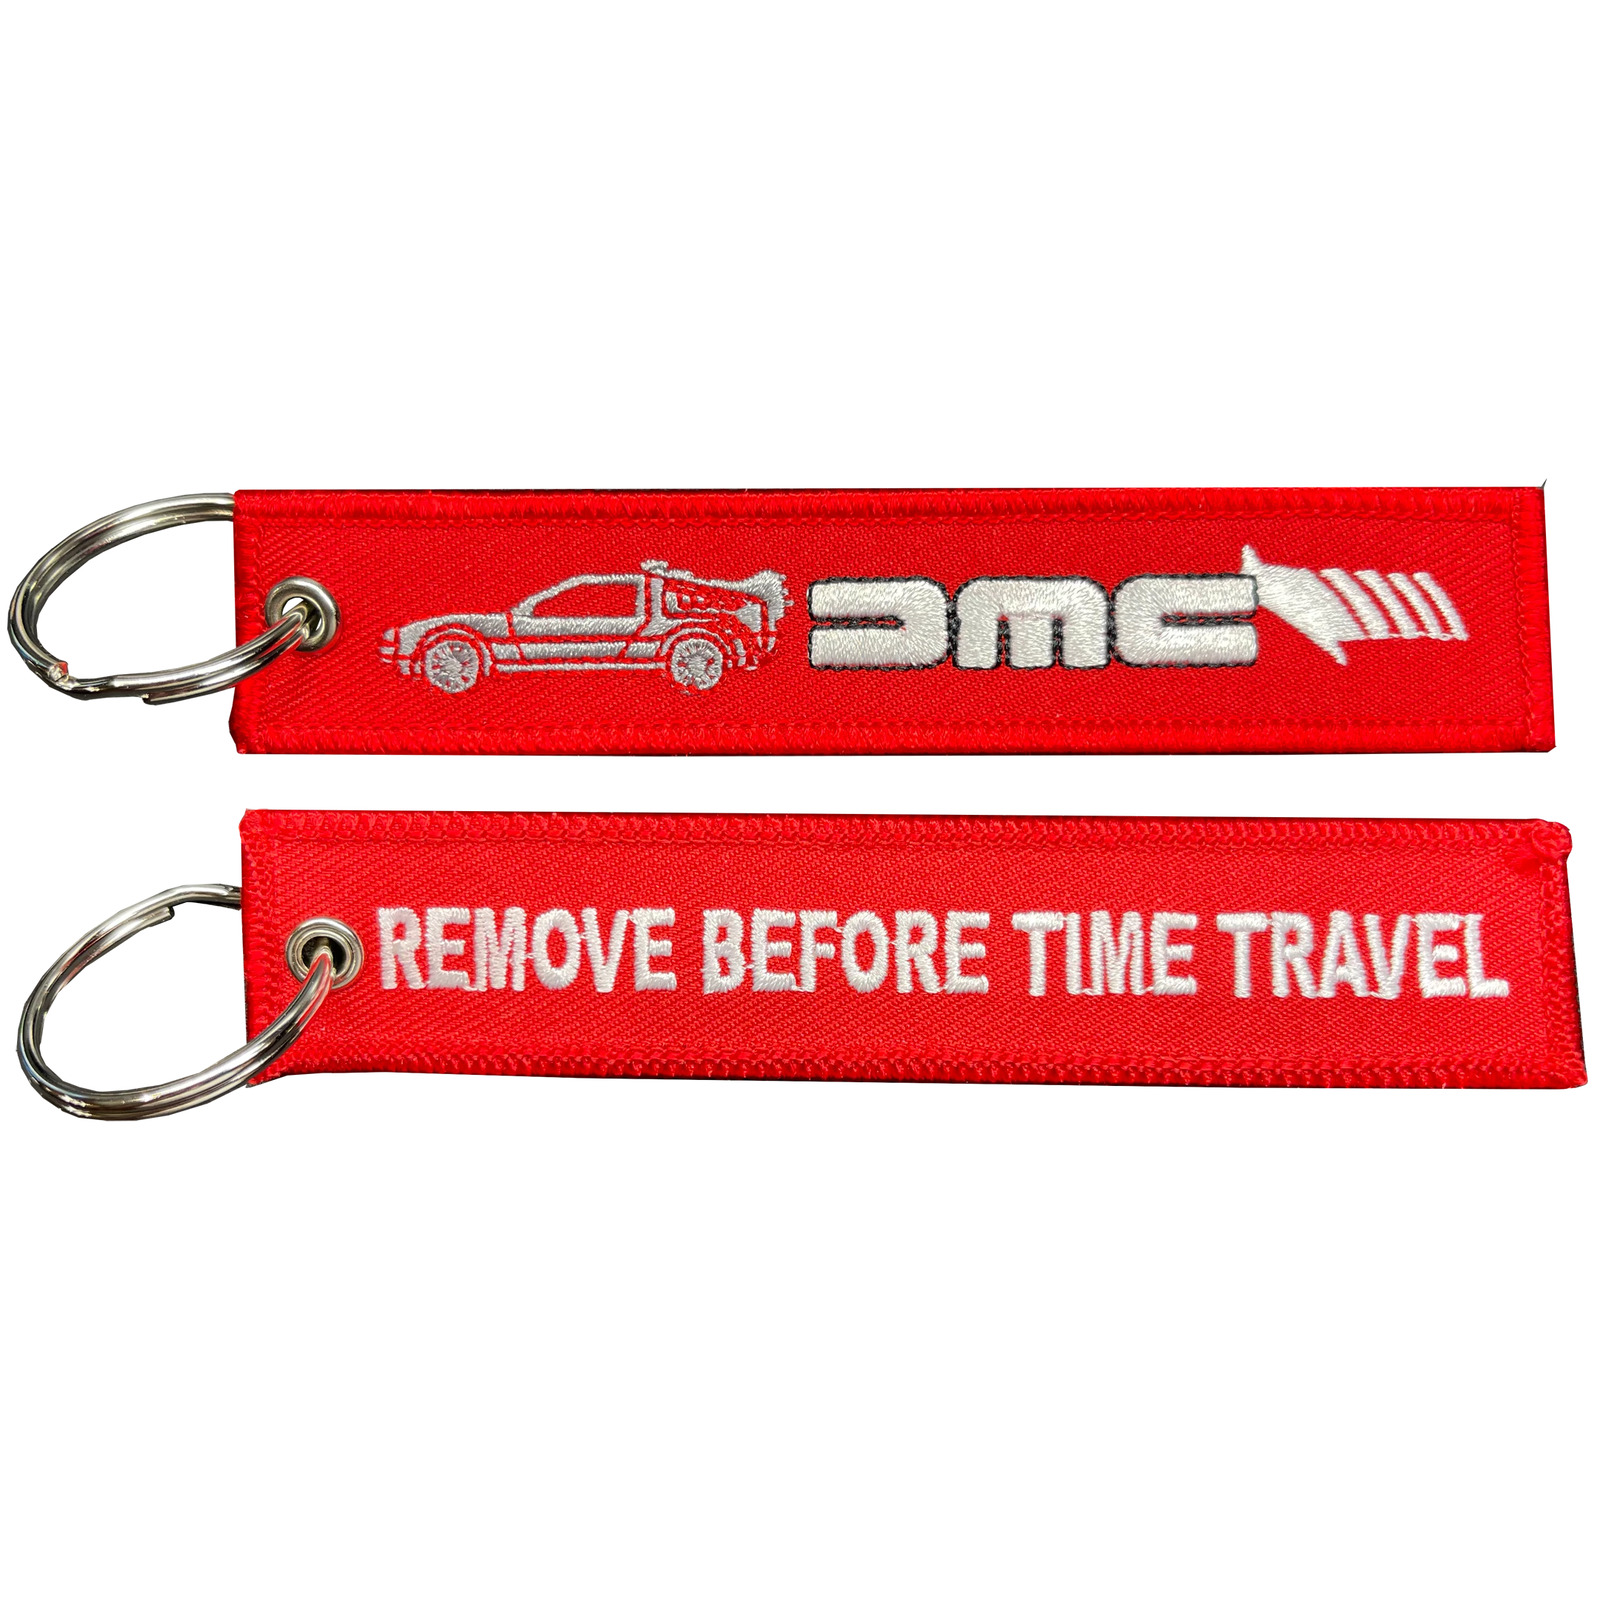 BL5-008 Remove Before Time Travel Keychain or Luggage Tag or zipper pull Back to